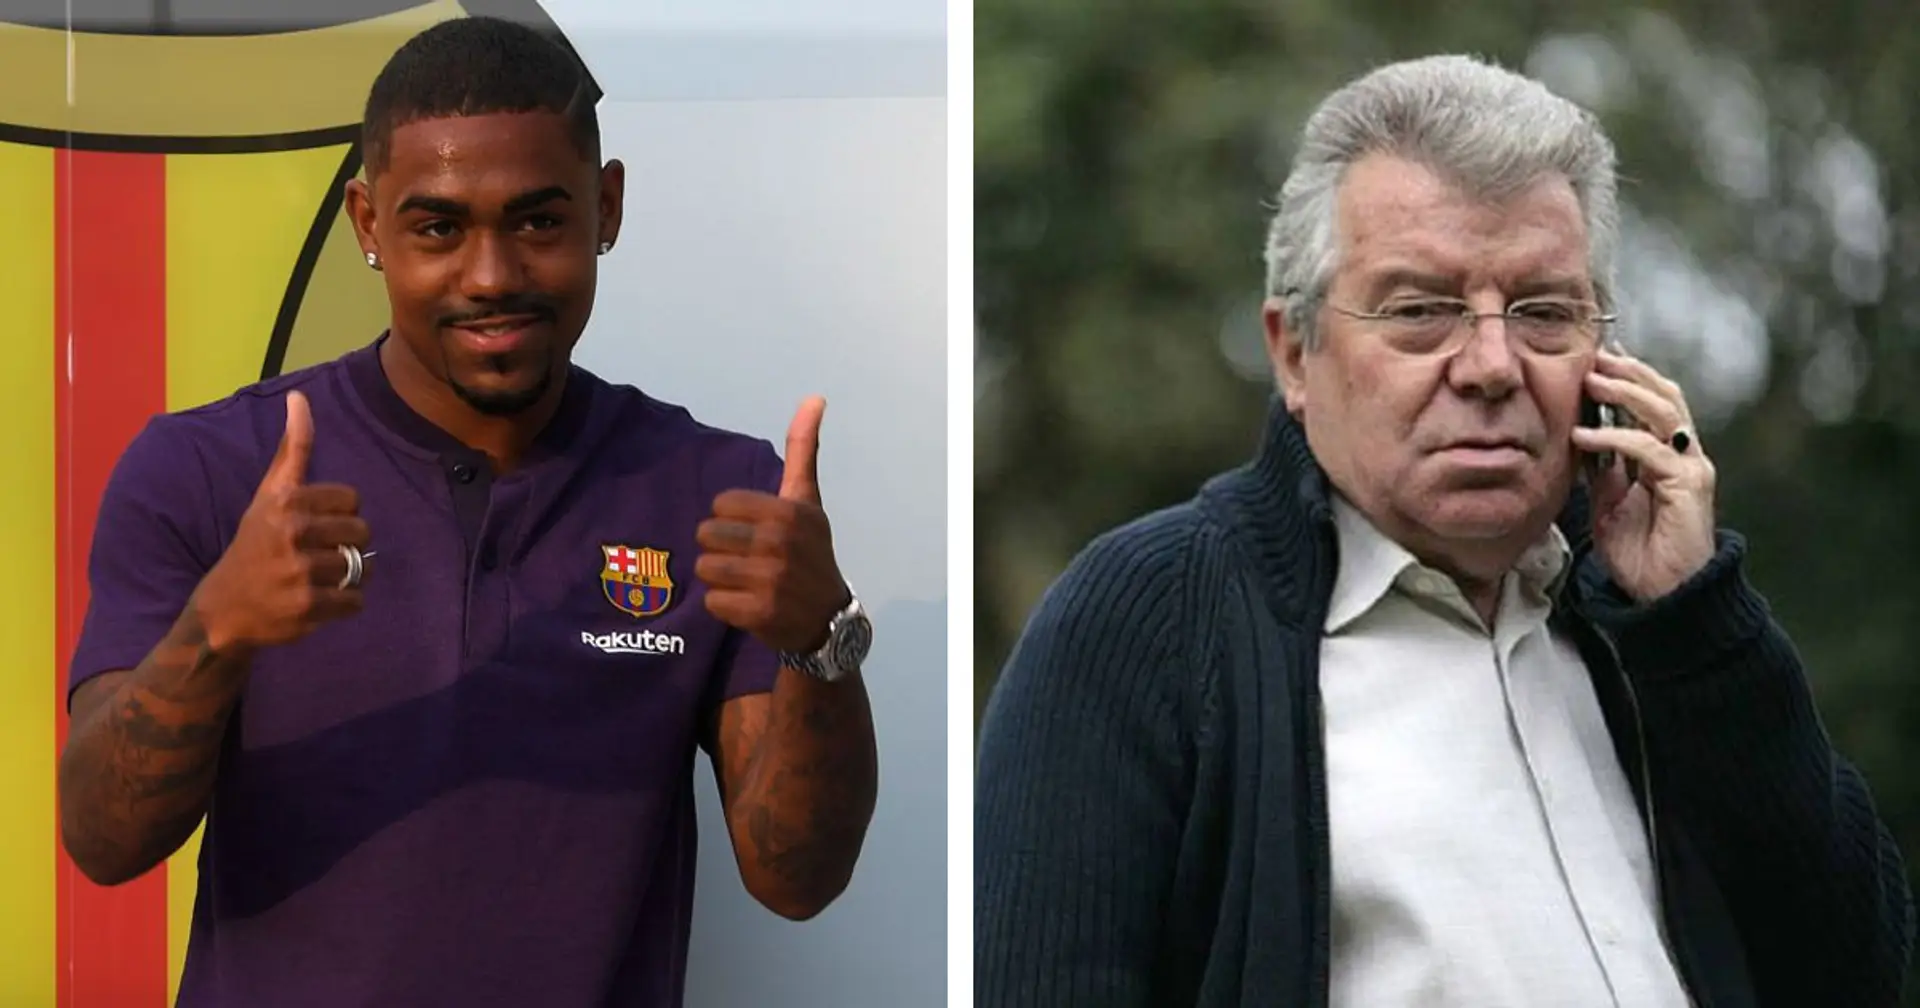 Josep Minguella denies receiving €10m from Barca for Malcom move, says 'real commission' was 'just over €1m'